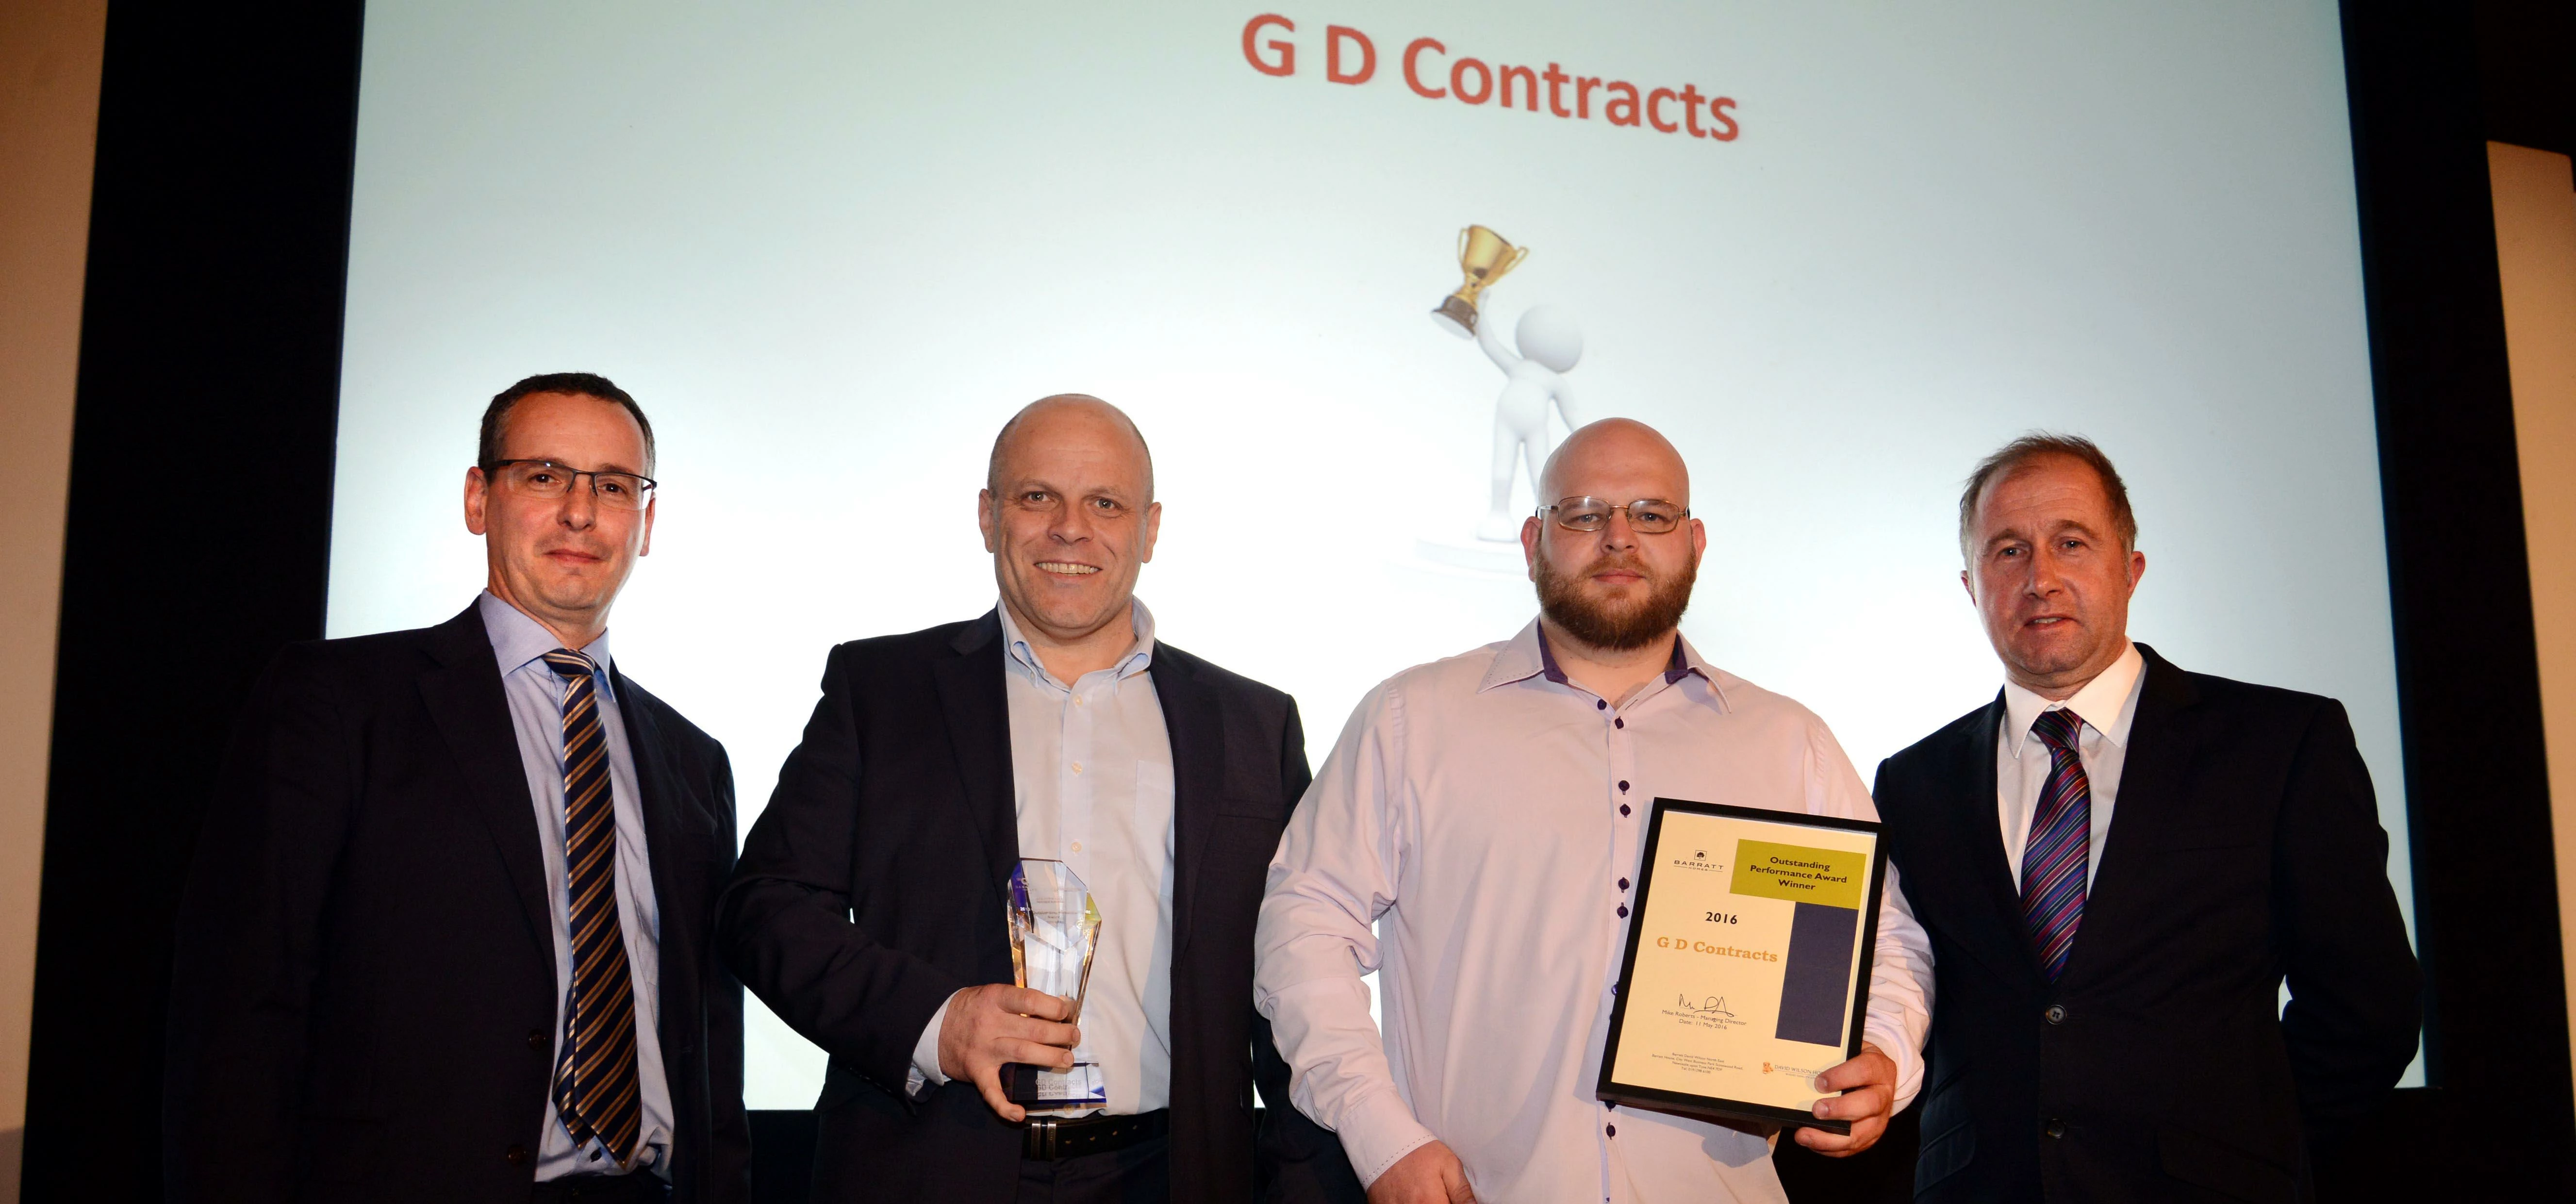 The Outstanding Performance Award went to G D Contracts